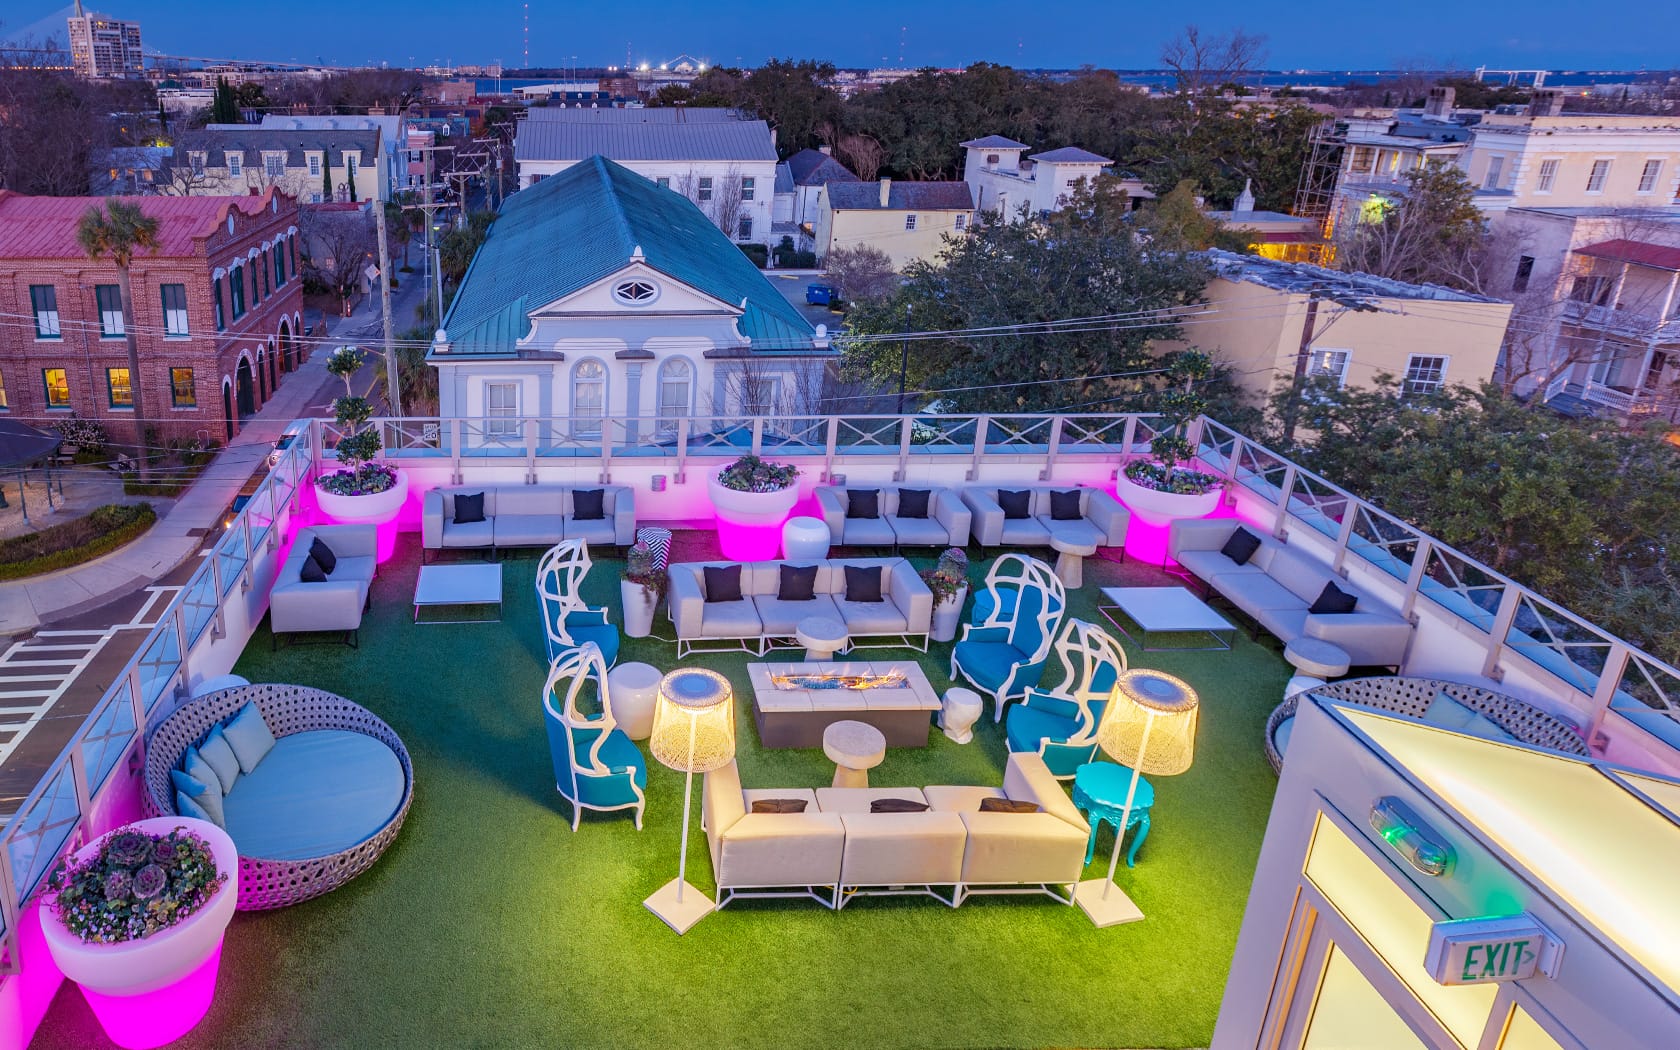 Spotted: 5 Amazing Rooftop Bars That Are Sure To Make Your Eyes Pop + Your Mouth Water in CHS